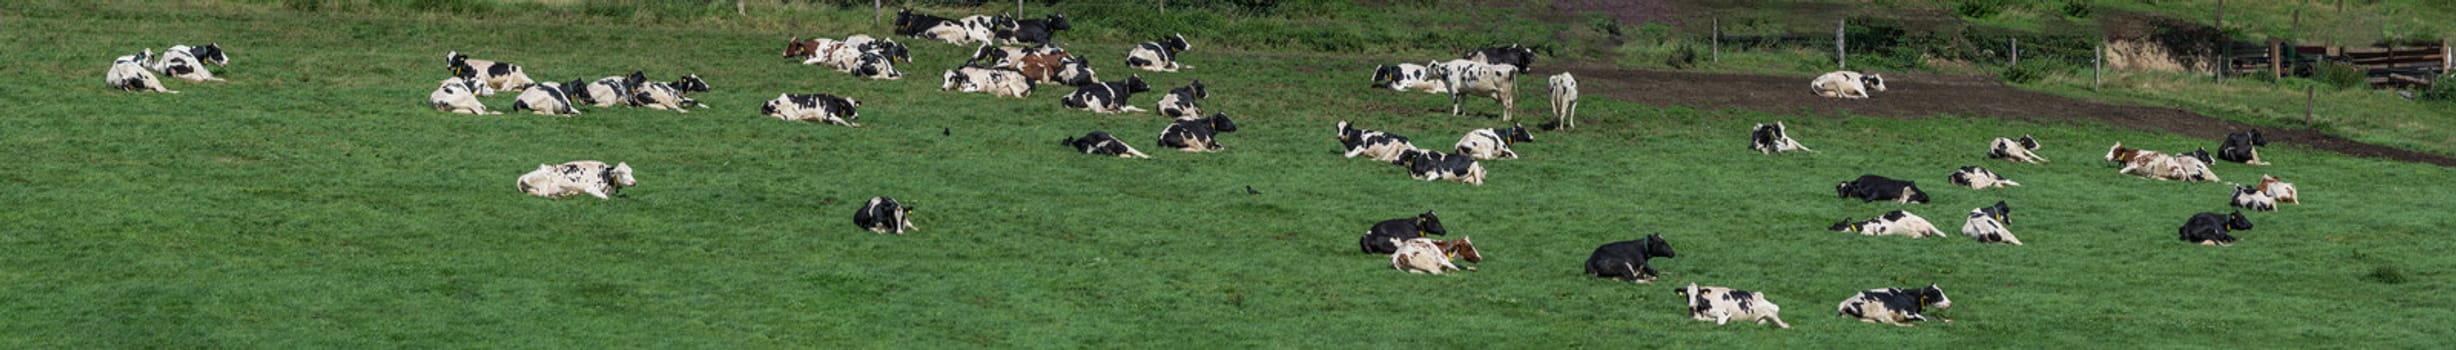 Cows of a dairy grazing on fields of a farm.